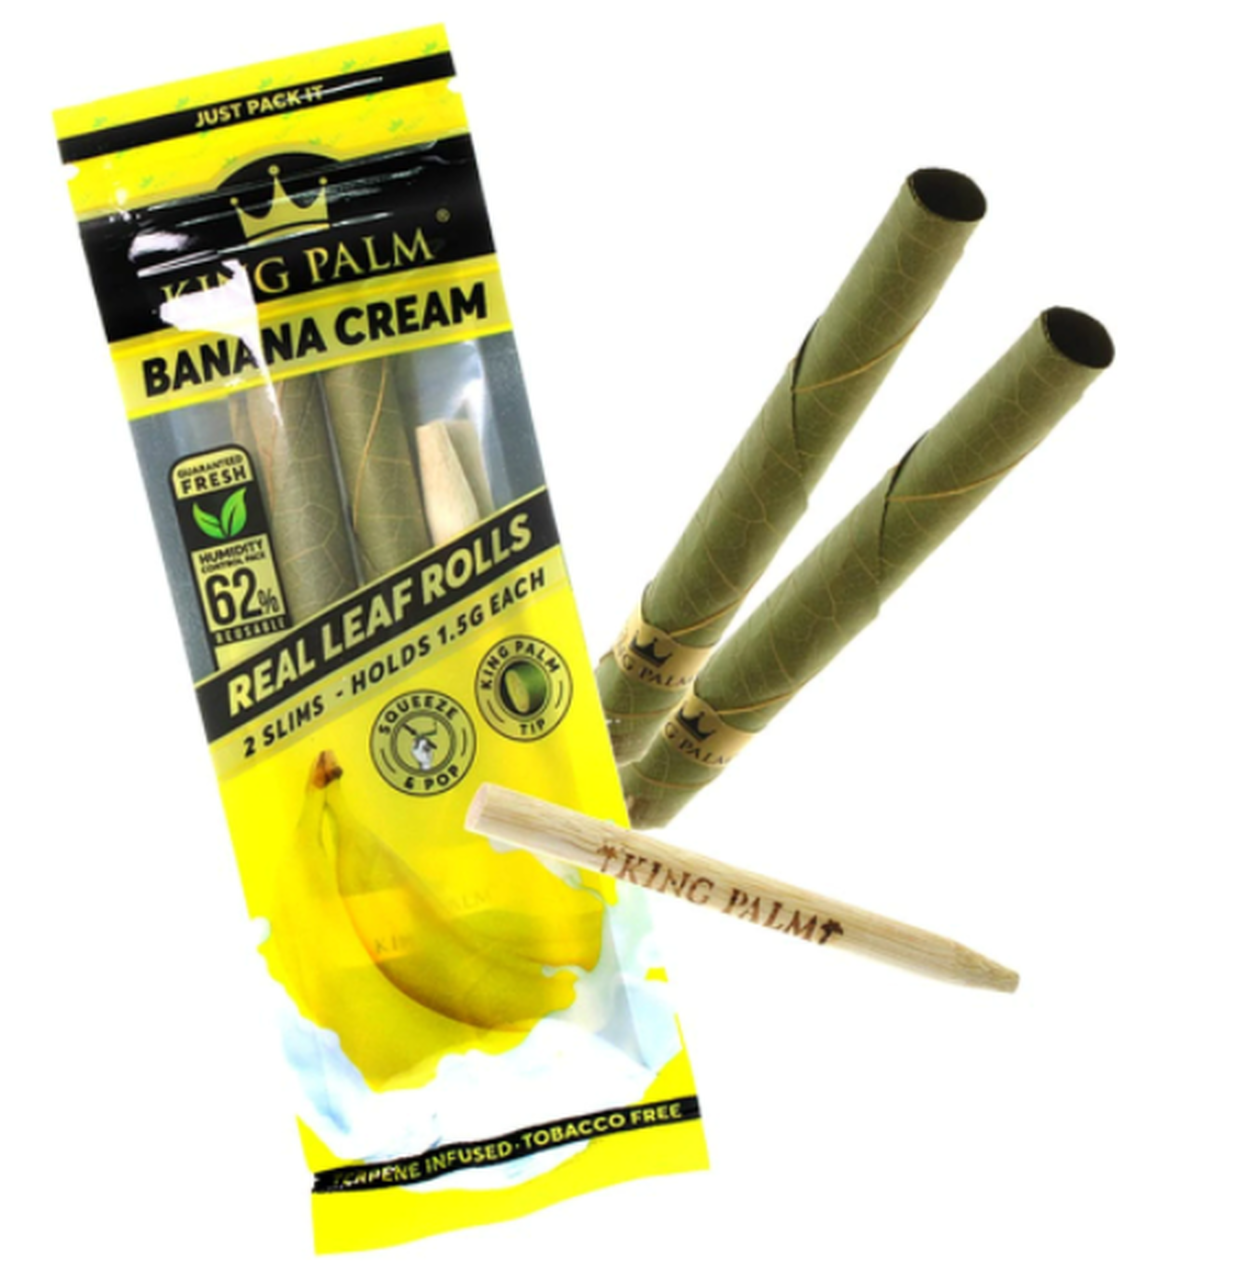 Blunt wrap gold, box of leaves to roll a blunt wrap gold leaf slim